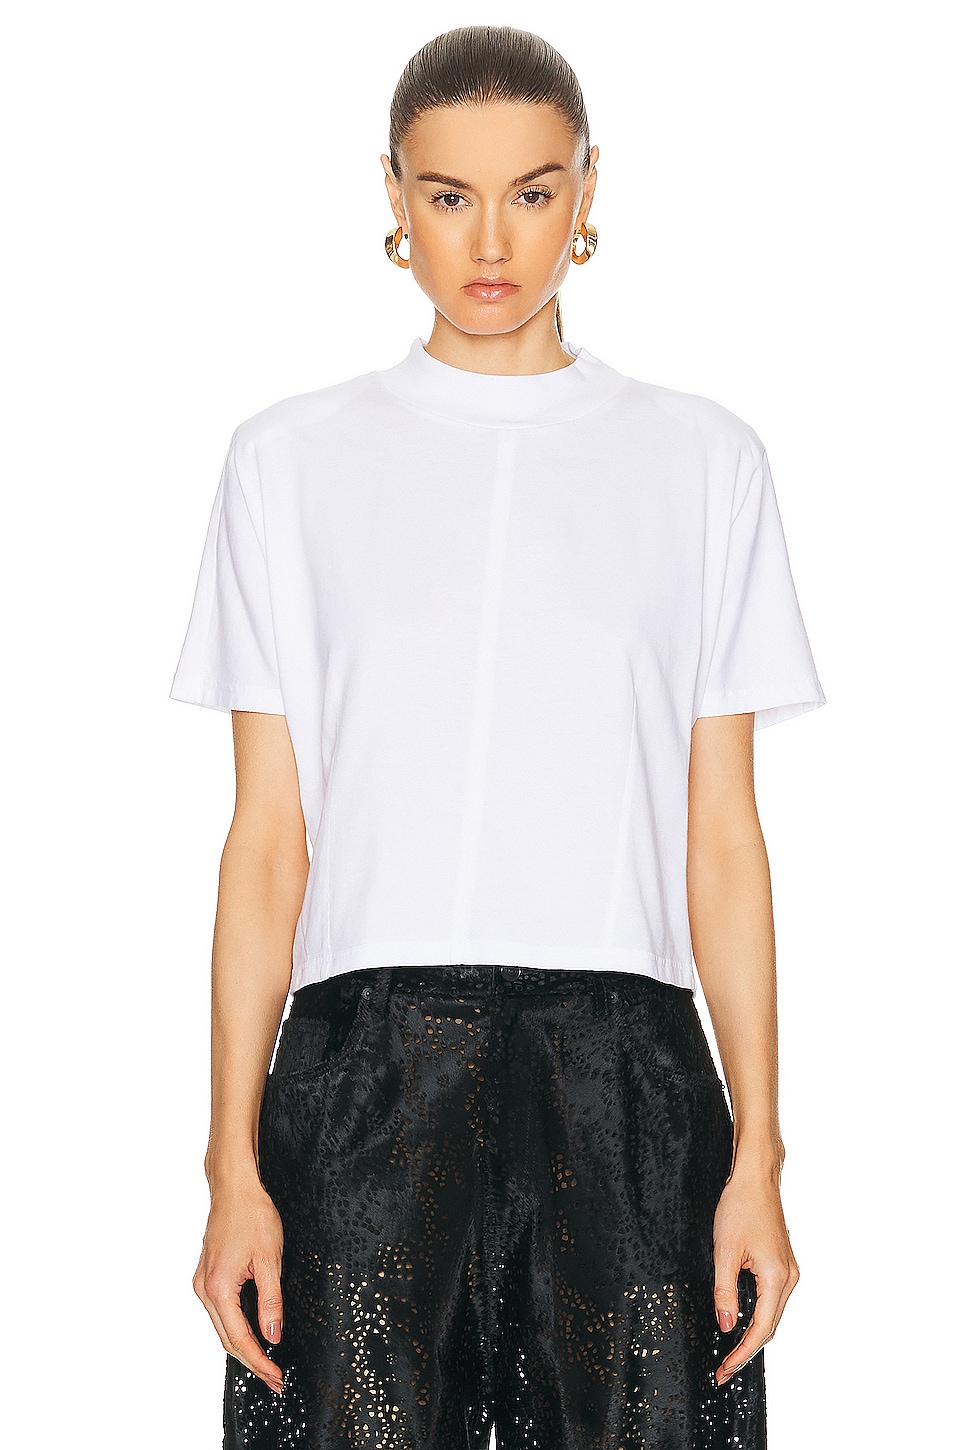 Image 1 of EZR Short Sleeve Tee in White